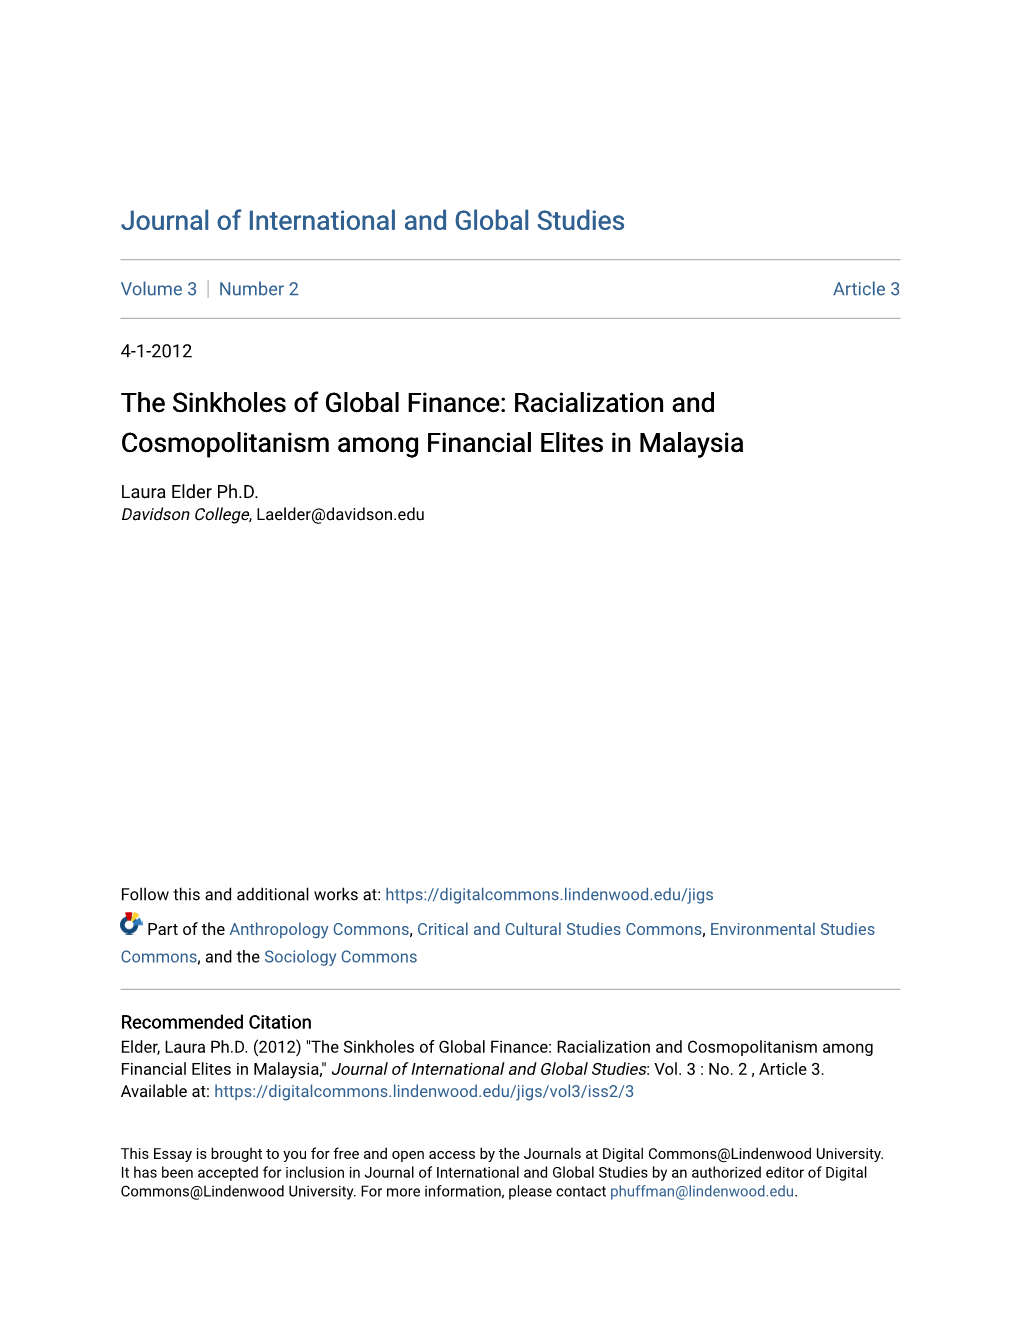 The Sinkholes of Global Finance: Racialization and Cosmopolitanism Among Financial Elites in Malaysia